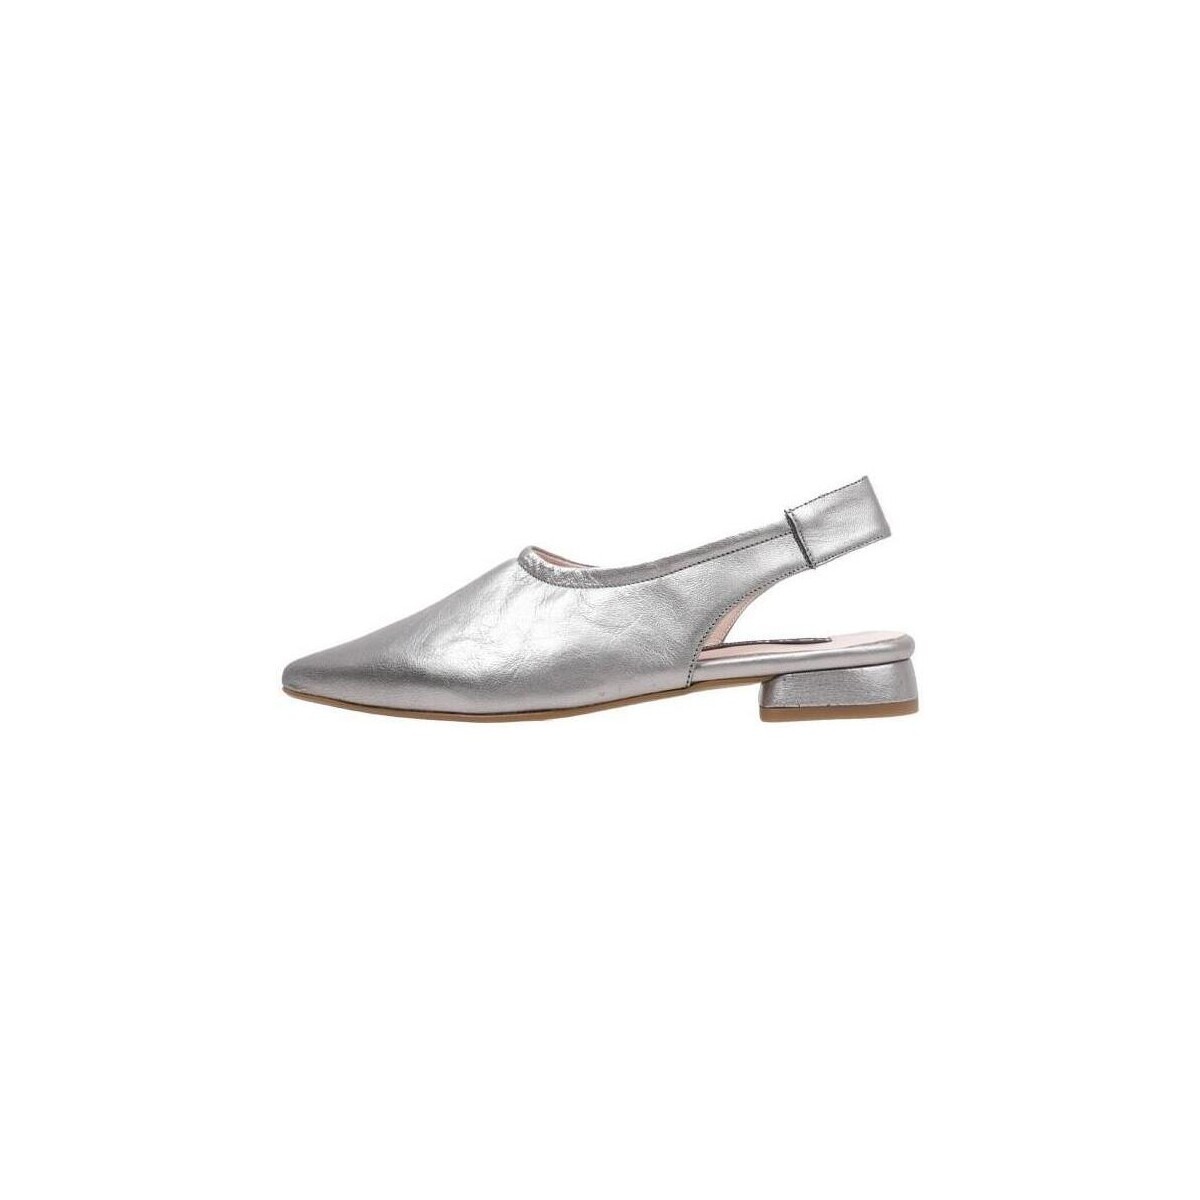 Krack - Women's Slippers in Grey from Spartoo GOOFASH